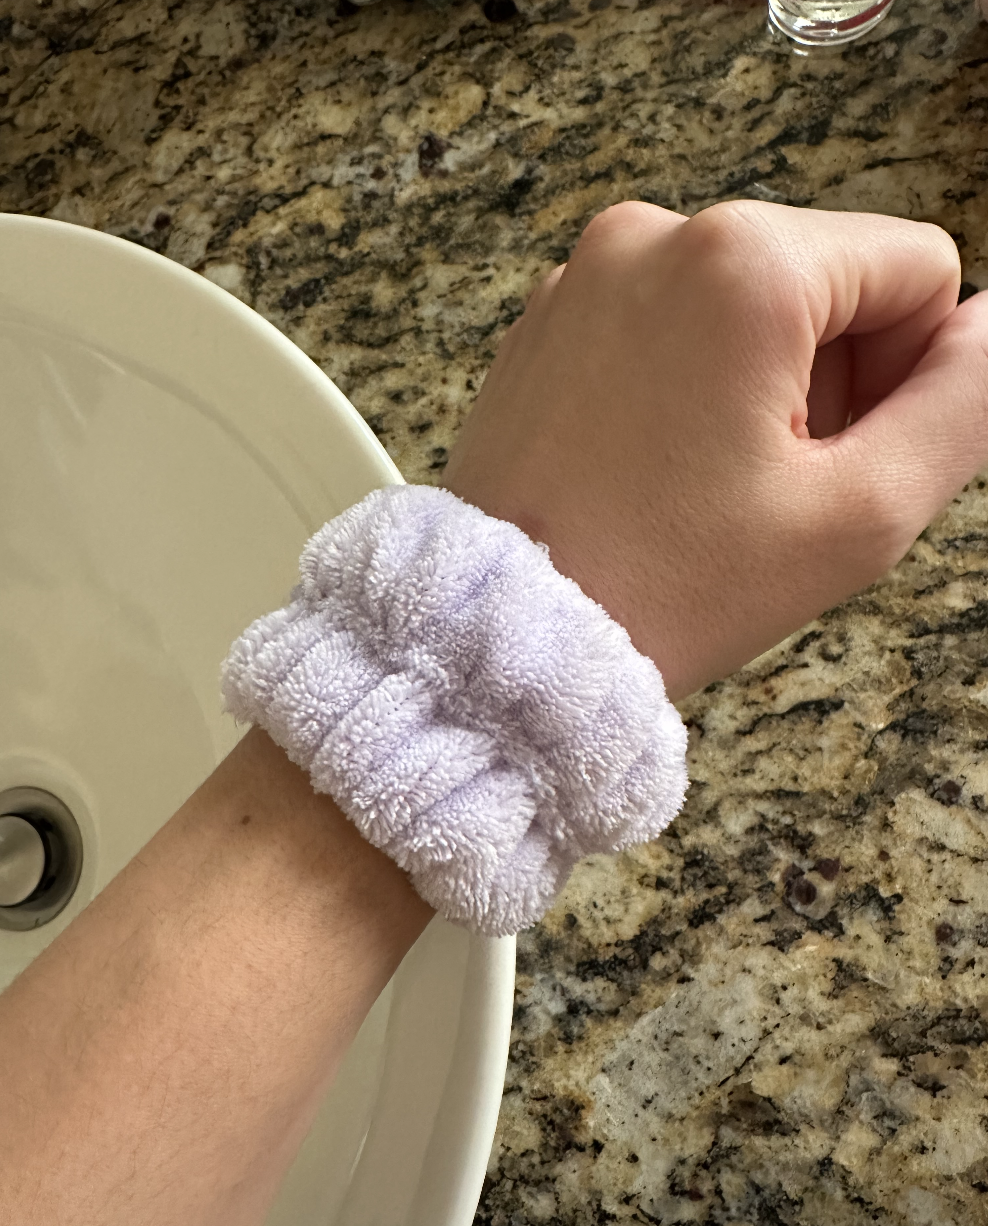 The author wearing a wrist towel